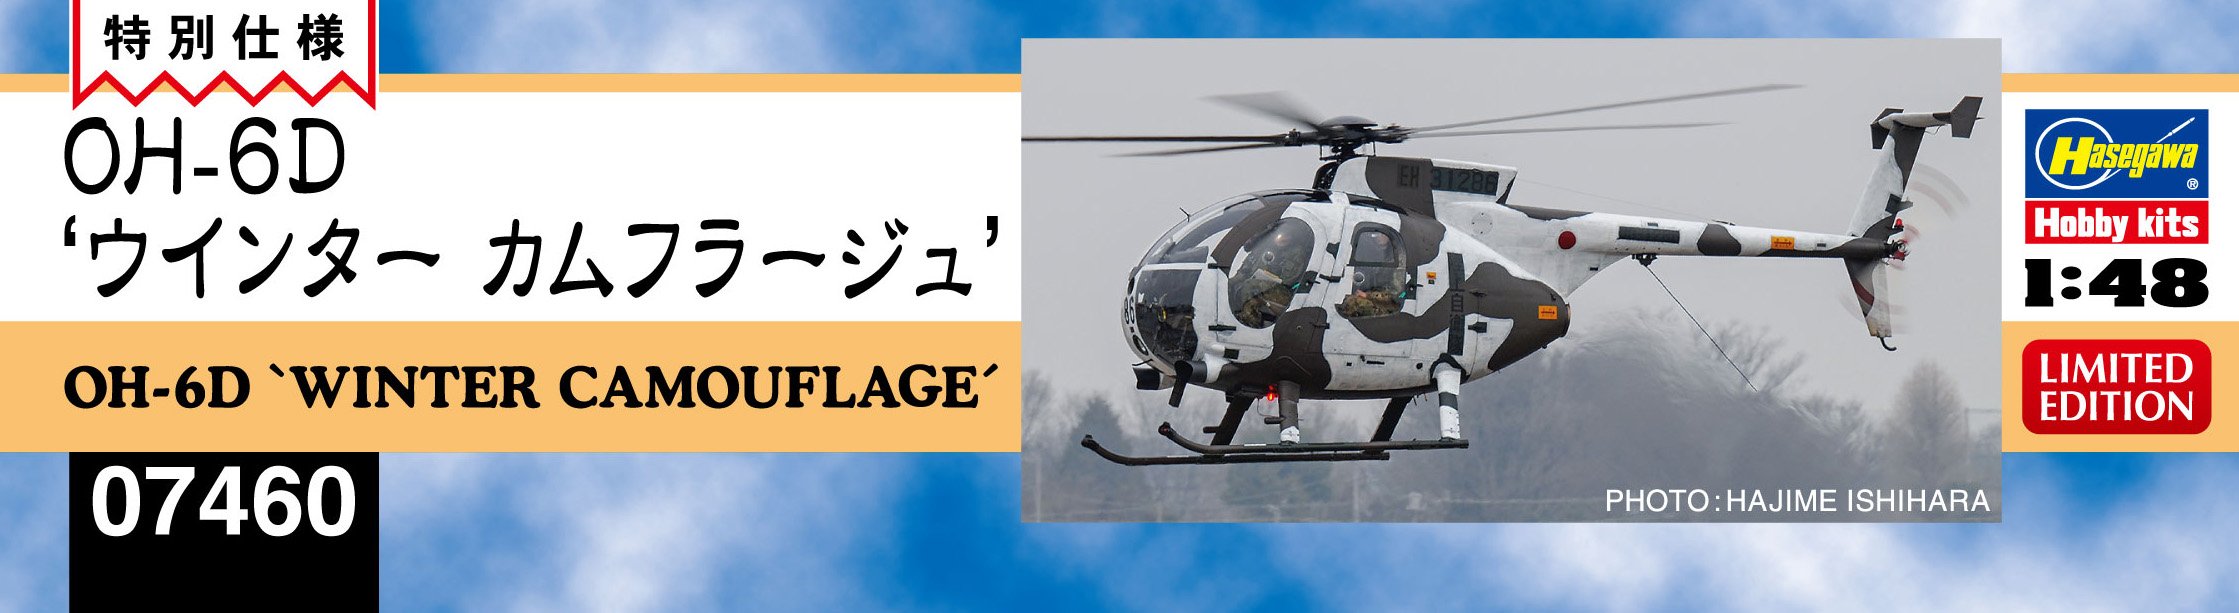 HASEGAWA 07460 Jgsdf Oh-6D Winter Camouflage 1/48 Scale Kit